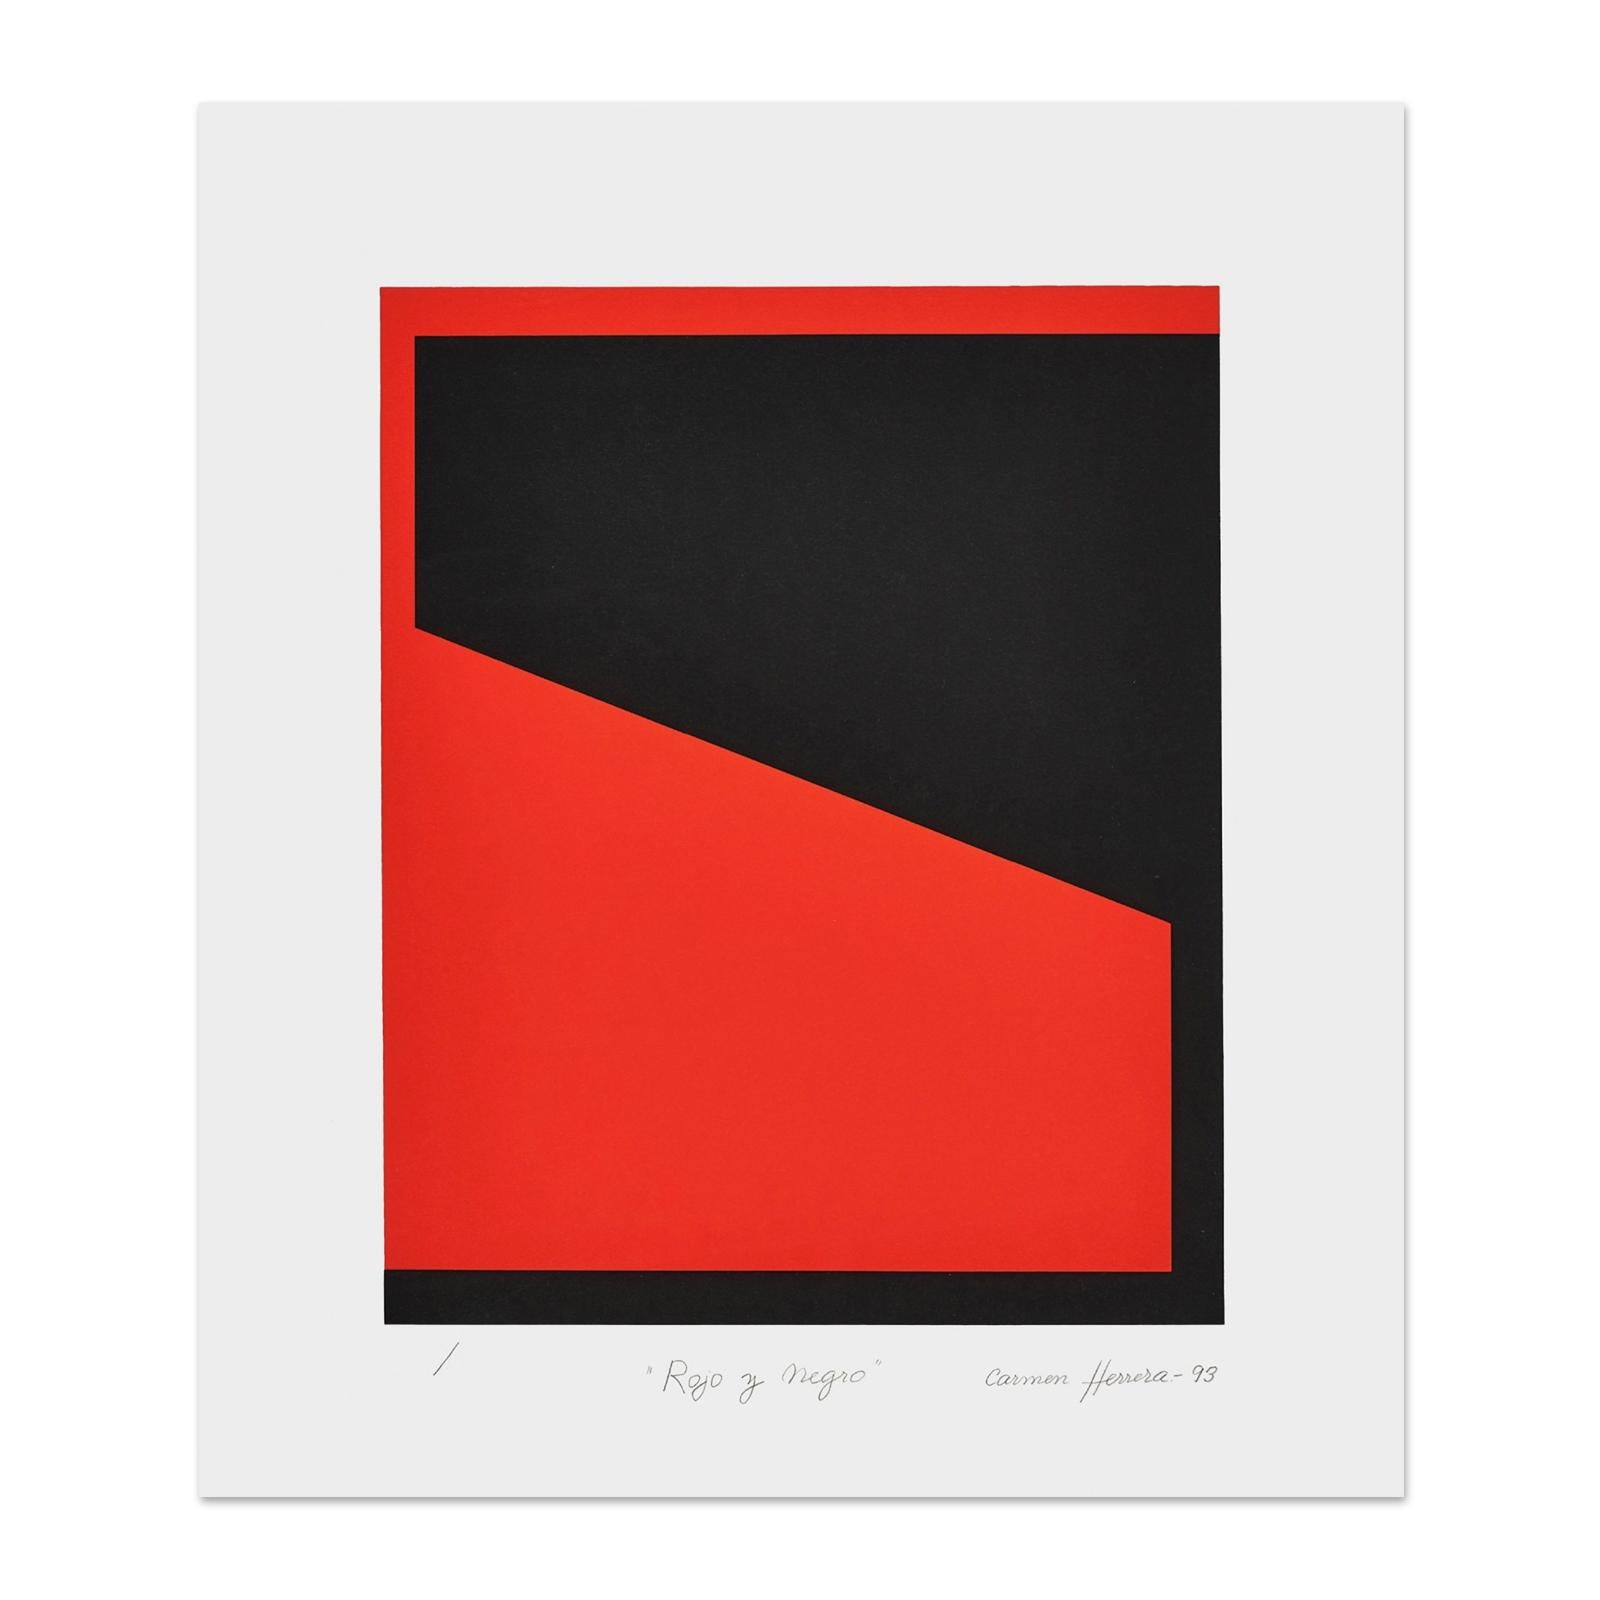 Carmen Herrera (Cuban, b. 1915)
Rojo y Negro, 1993
Medium: Screenprint on wove paper
Dimensions: 55.7 × 48 cm (21 9/10 × 18 9/10 in)
Edition of 200 + 25 A.P.: Hand-signed, numbered, titled and dated
Condition: Very good